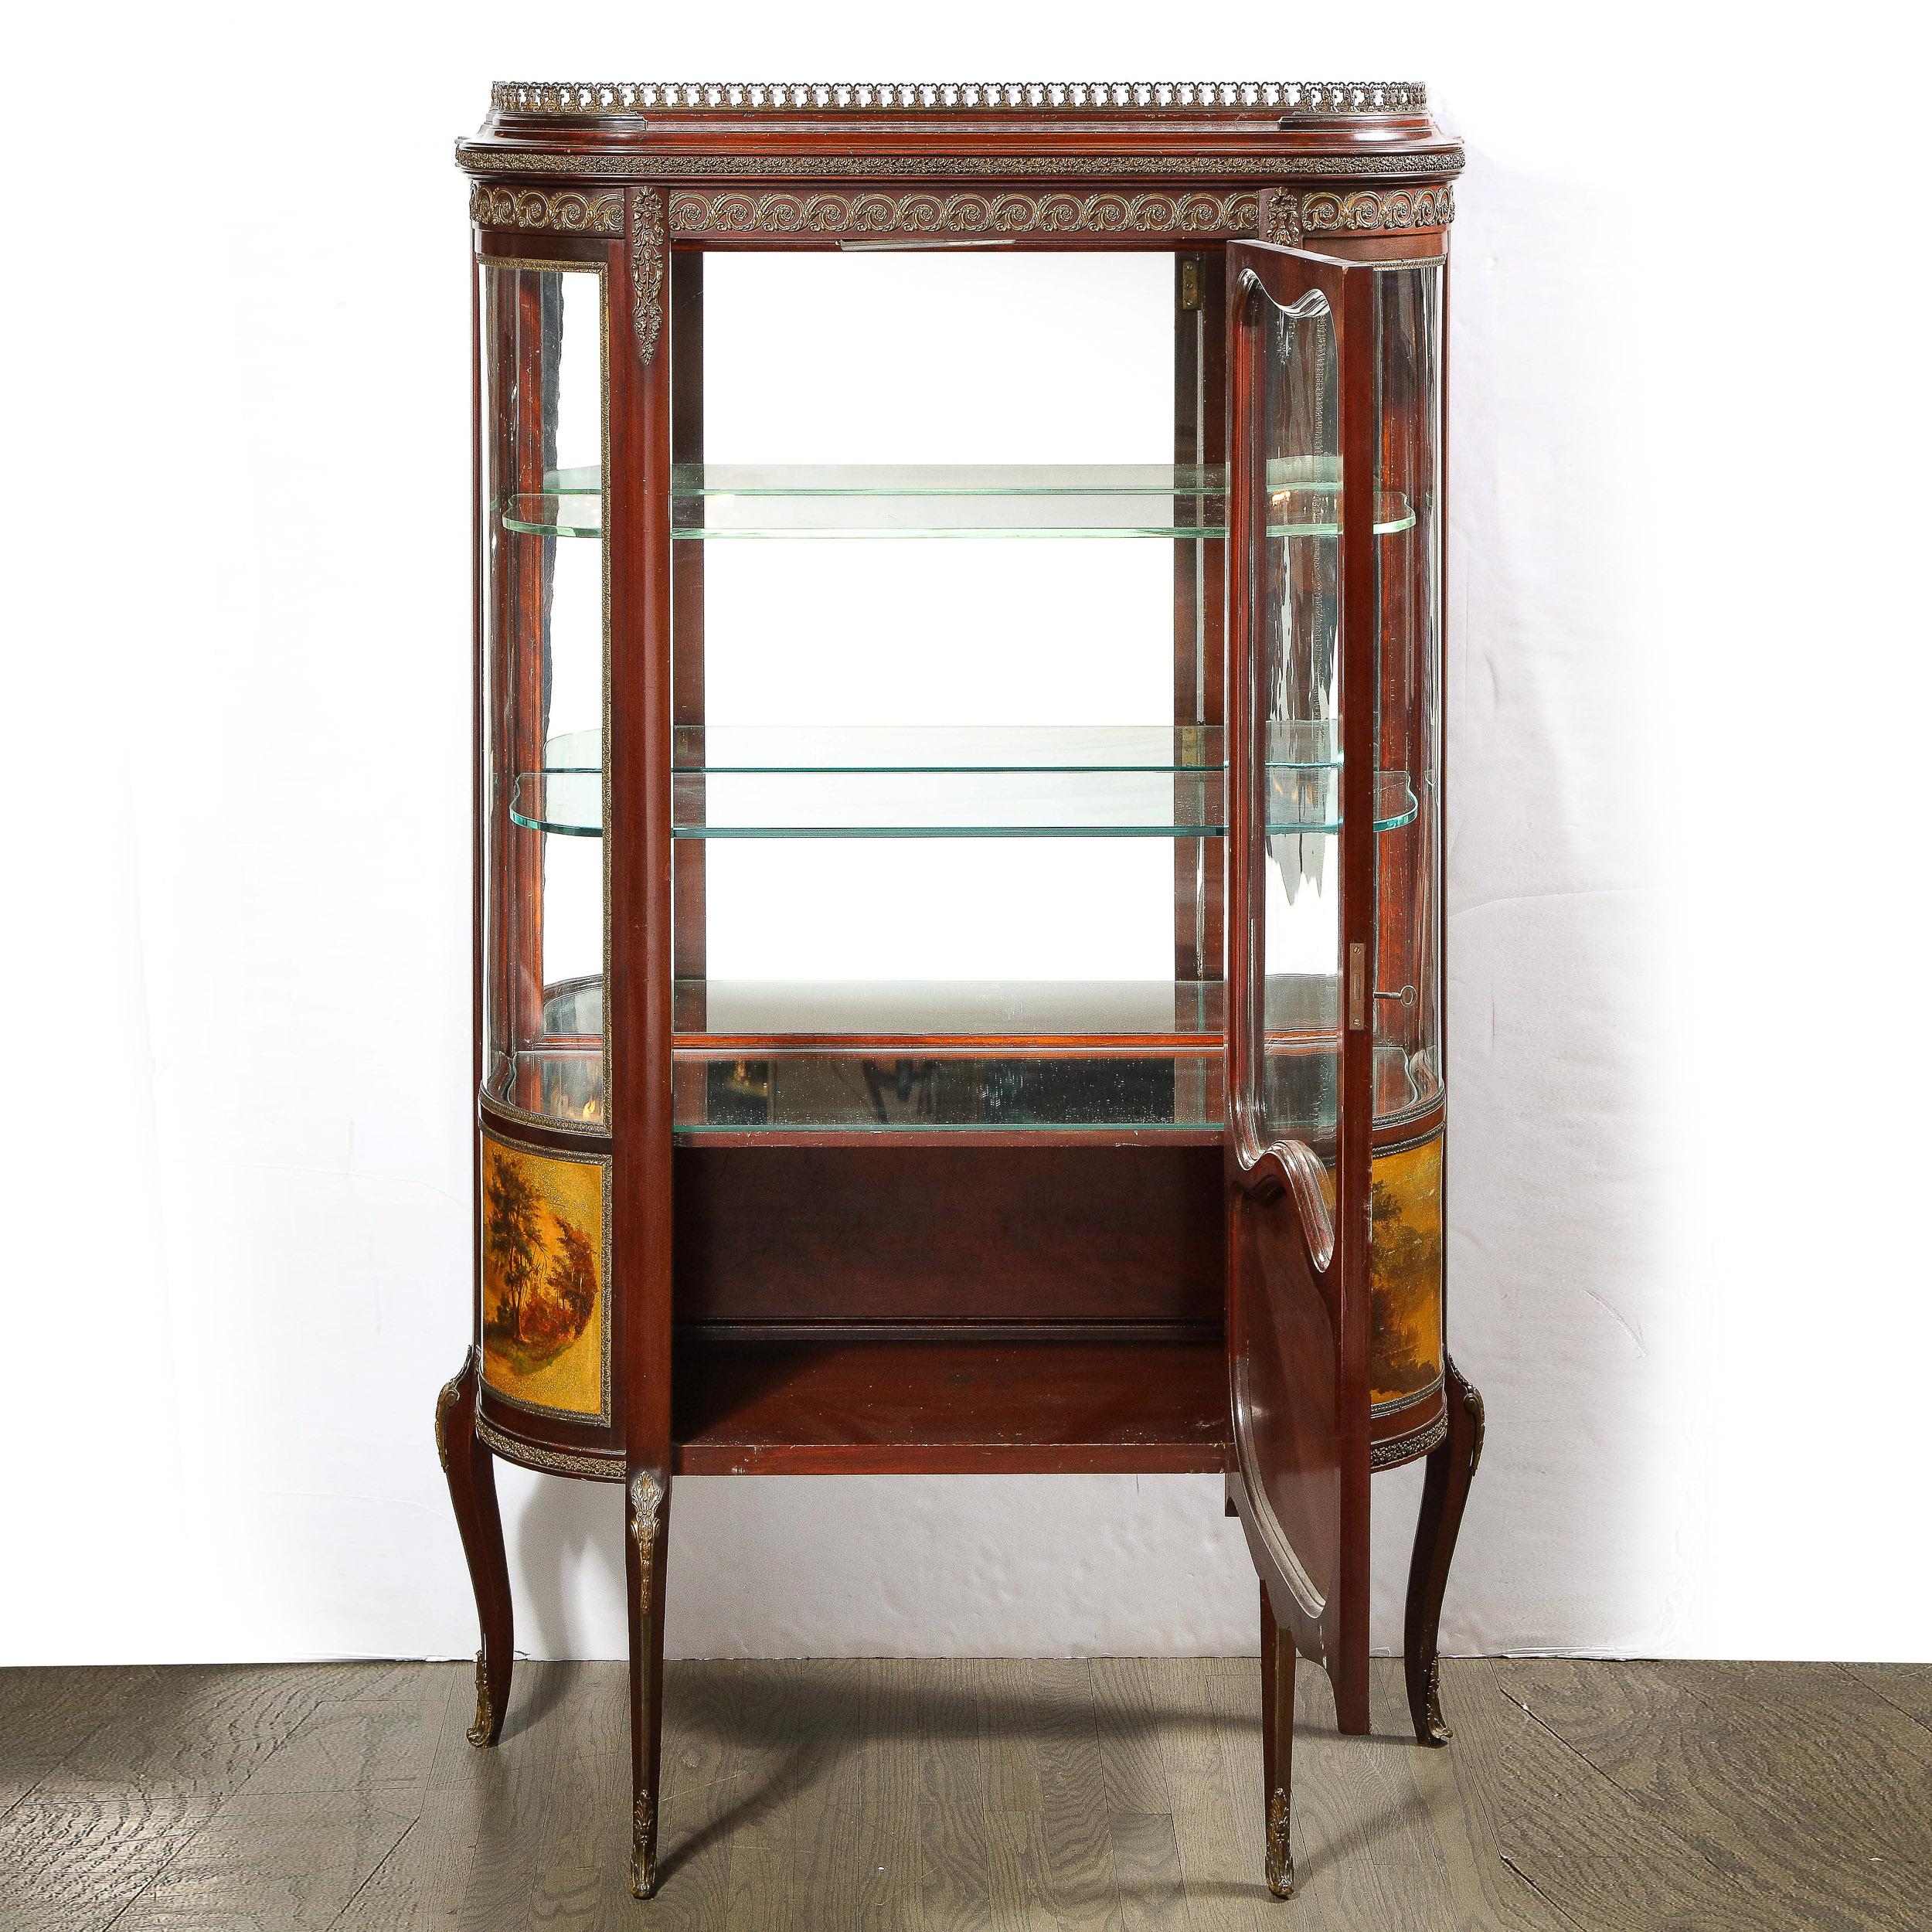 This stunning vitrine was realized by the esteemed maker Vernis Martin in France during the 19th century. The piece on stylized cabriolet legs that are traced down the center with a strip of bronze replete with a wealth of neoclassical detailing